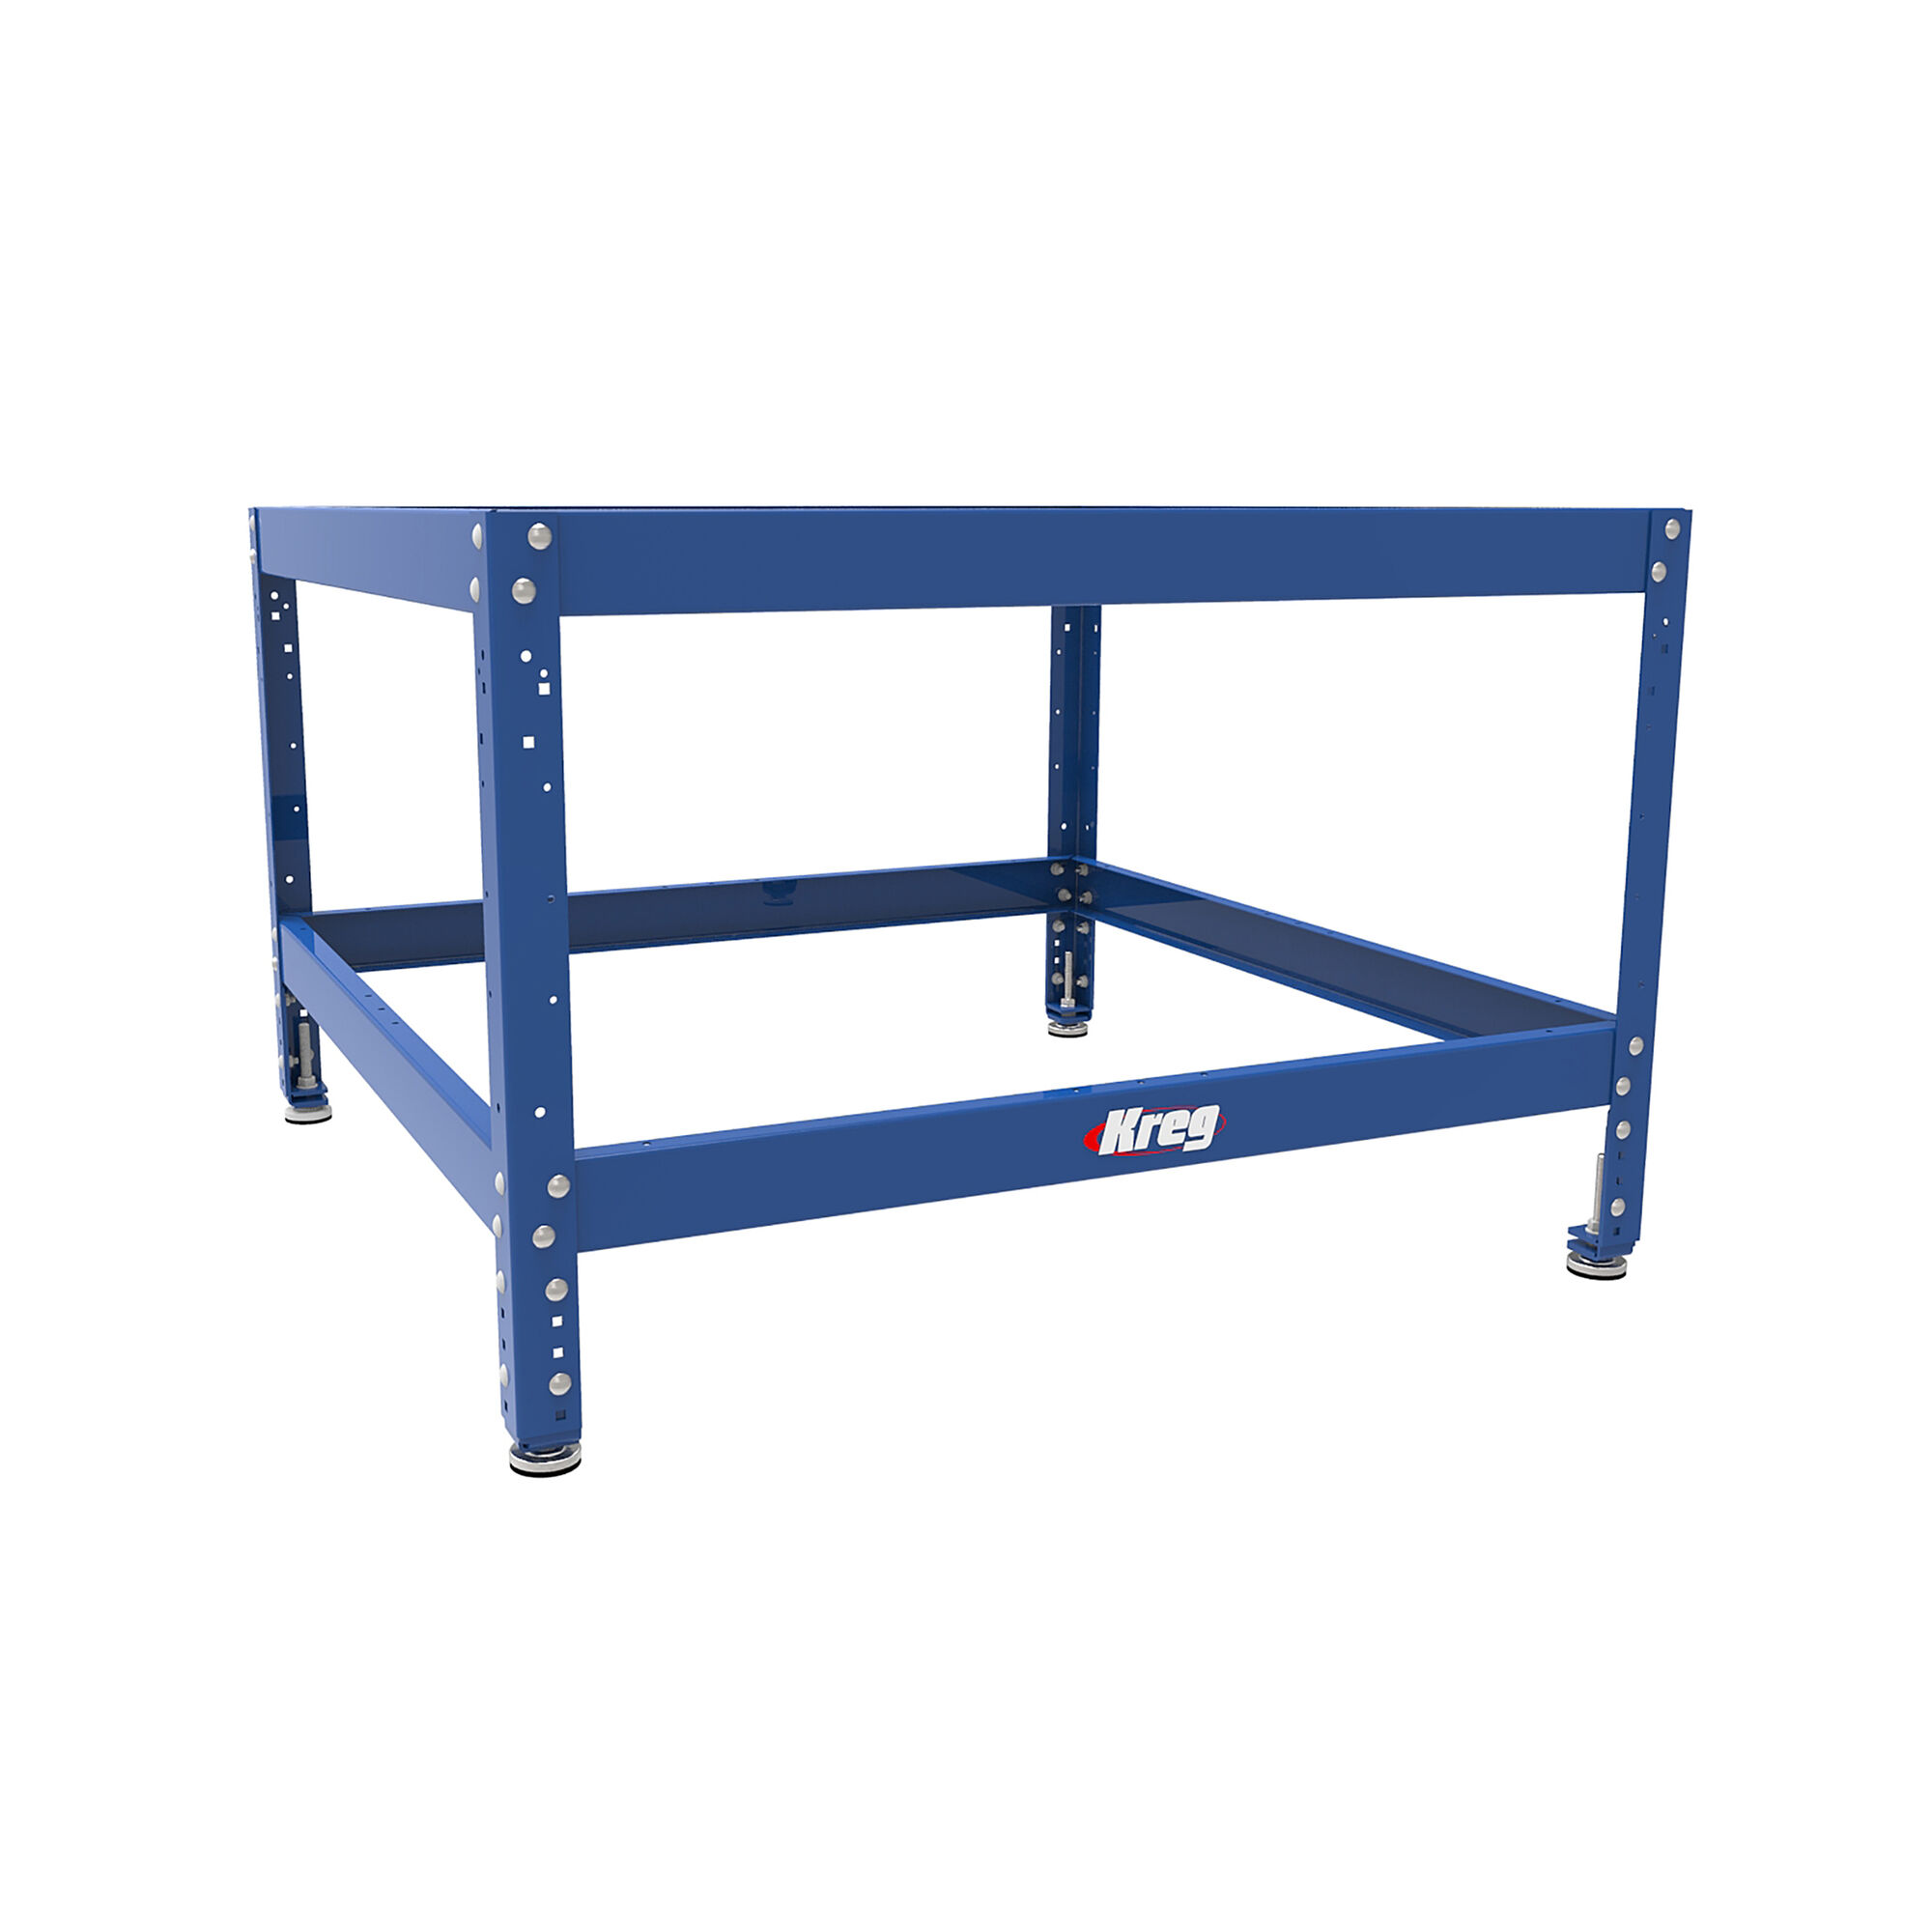 44 X 44 Universal Bench With Standard Height Legs